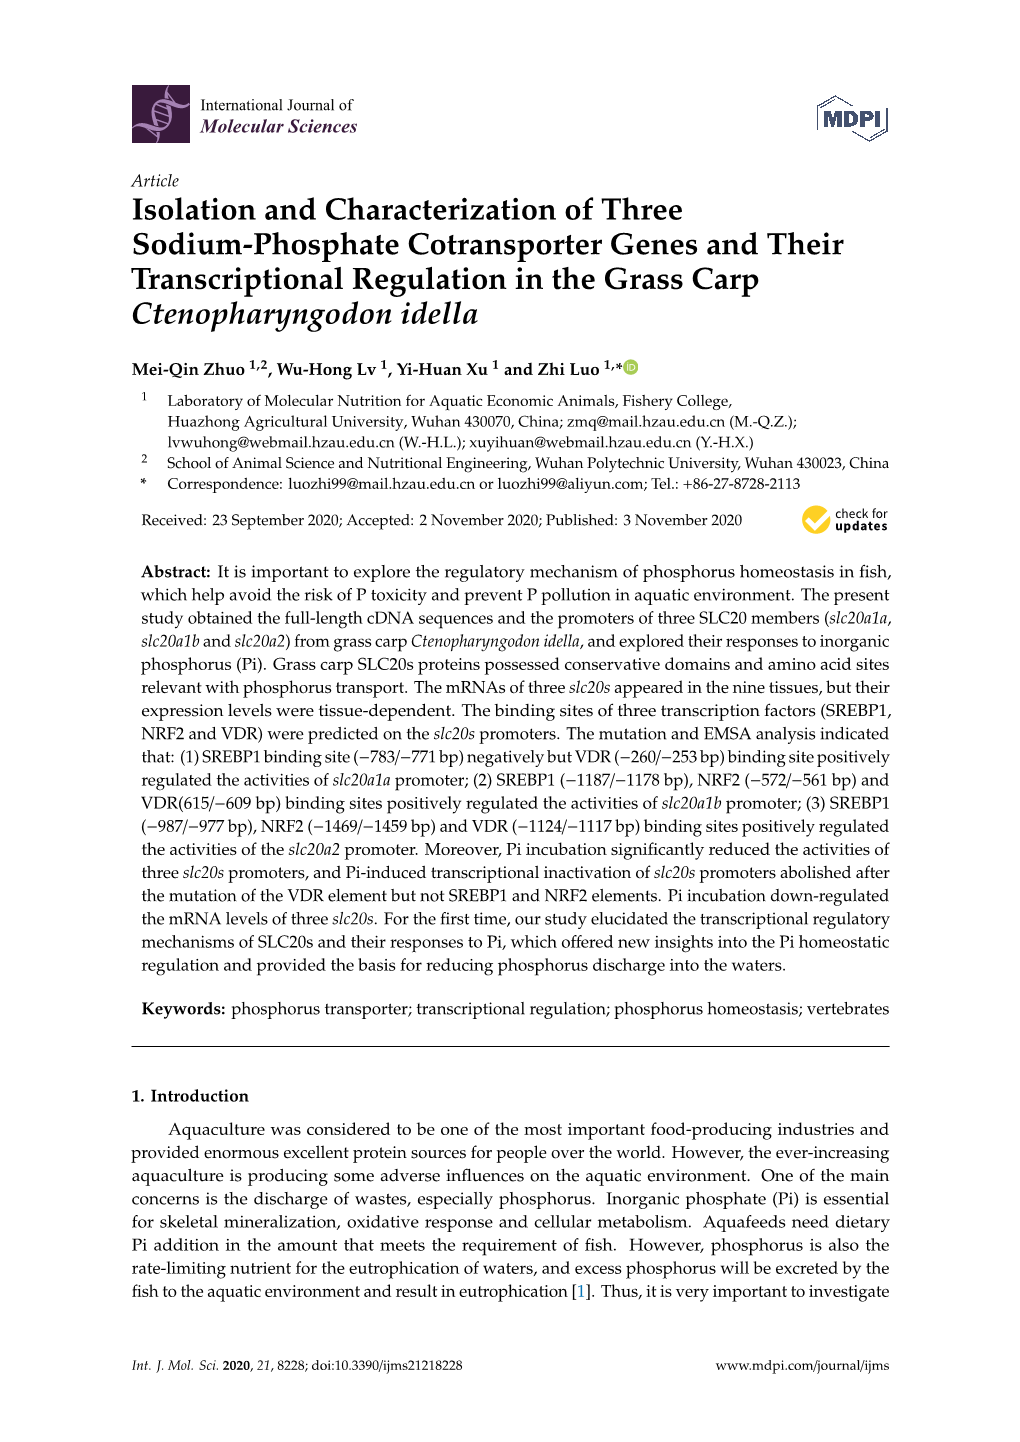 Isolation and Characterization of Three Sodium-Phosphate Cotransporter Genes and Their Transcriptional Regulation in the Grass Carp Ctenopharyngodon Idella